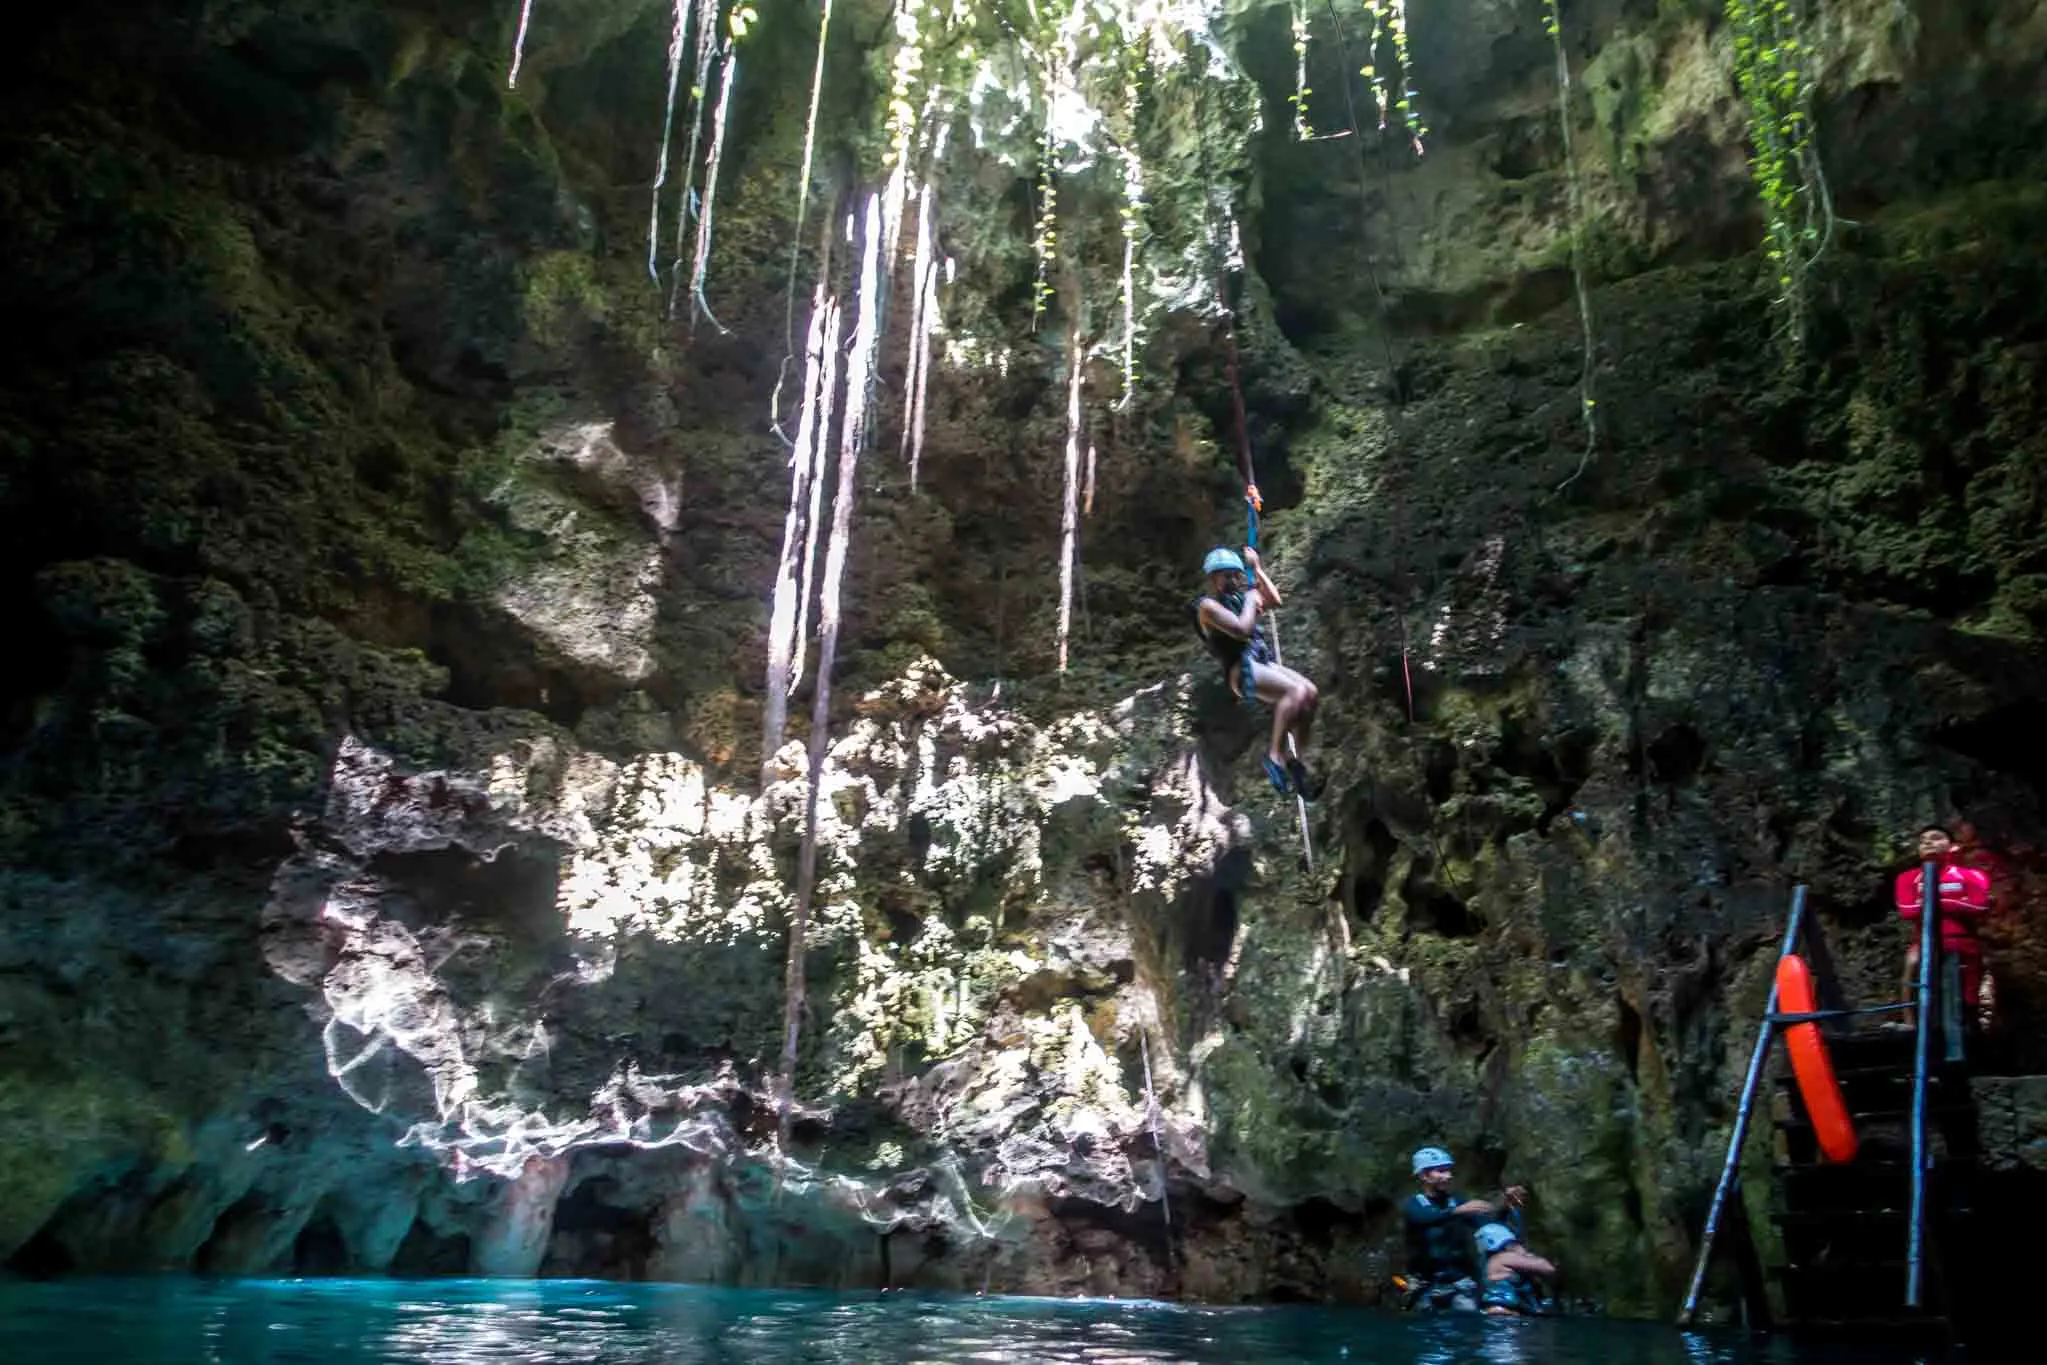 People rappelling into a cave cenote near Cancun